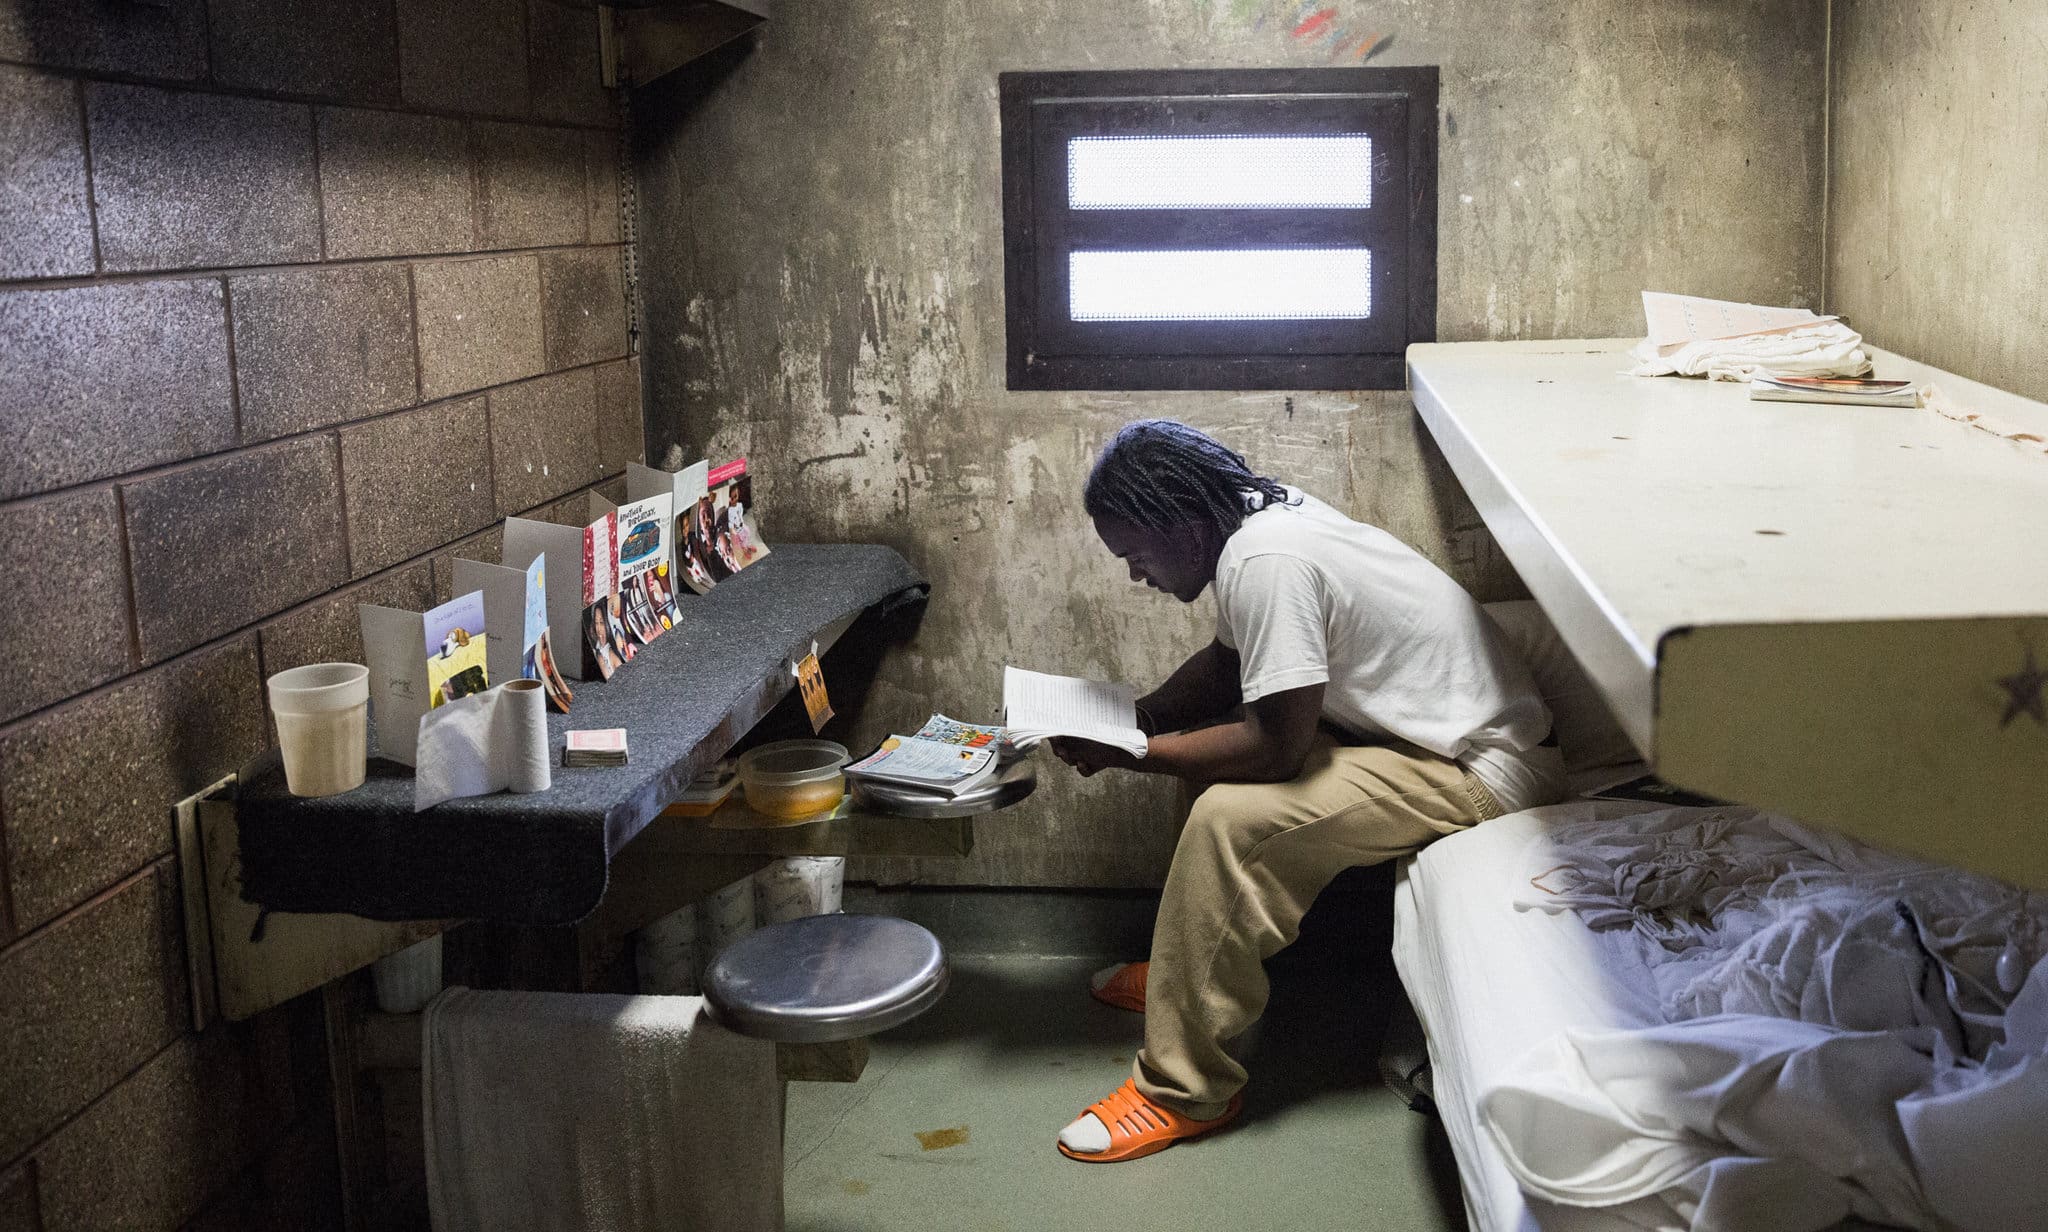 Cook County Jail, Illinois - The Most Dangerous Jails In The US